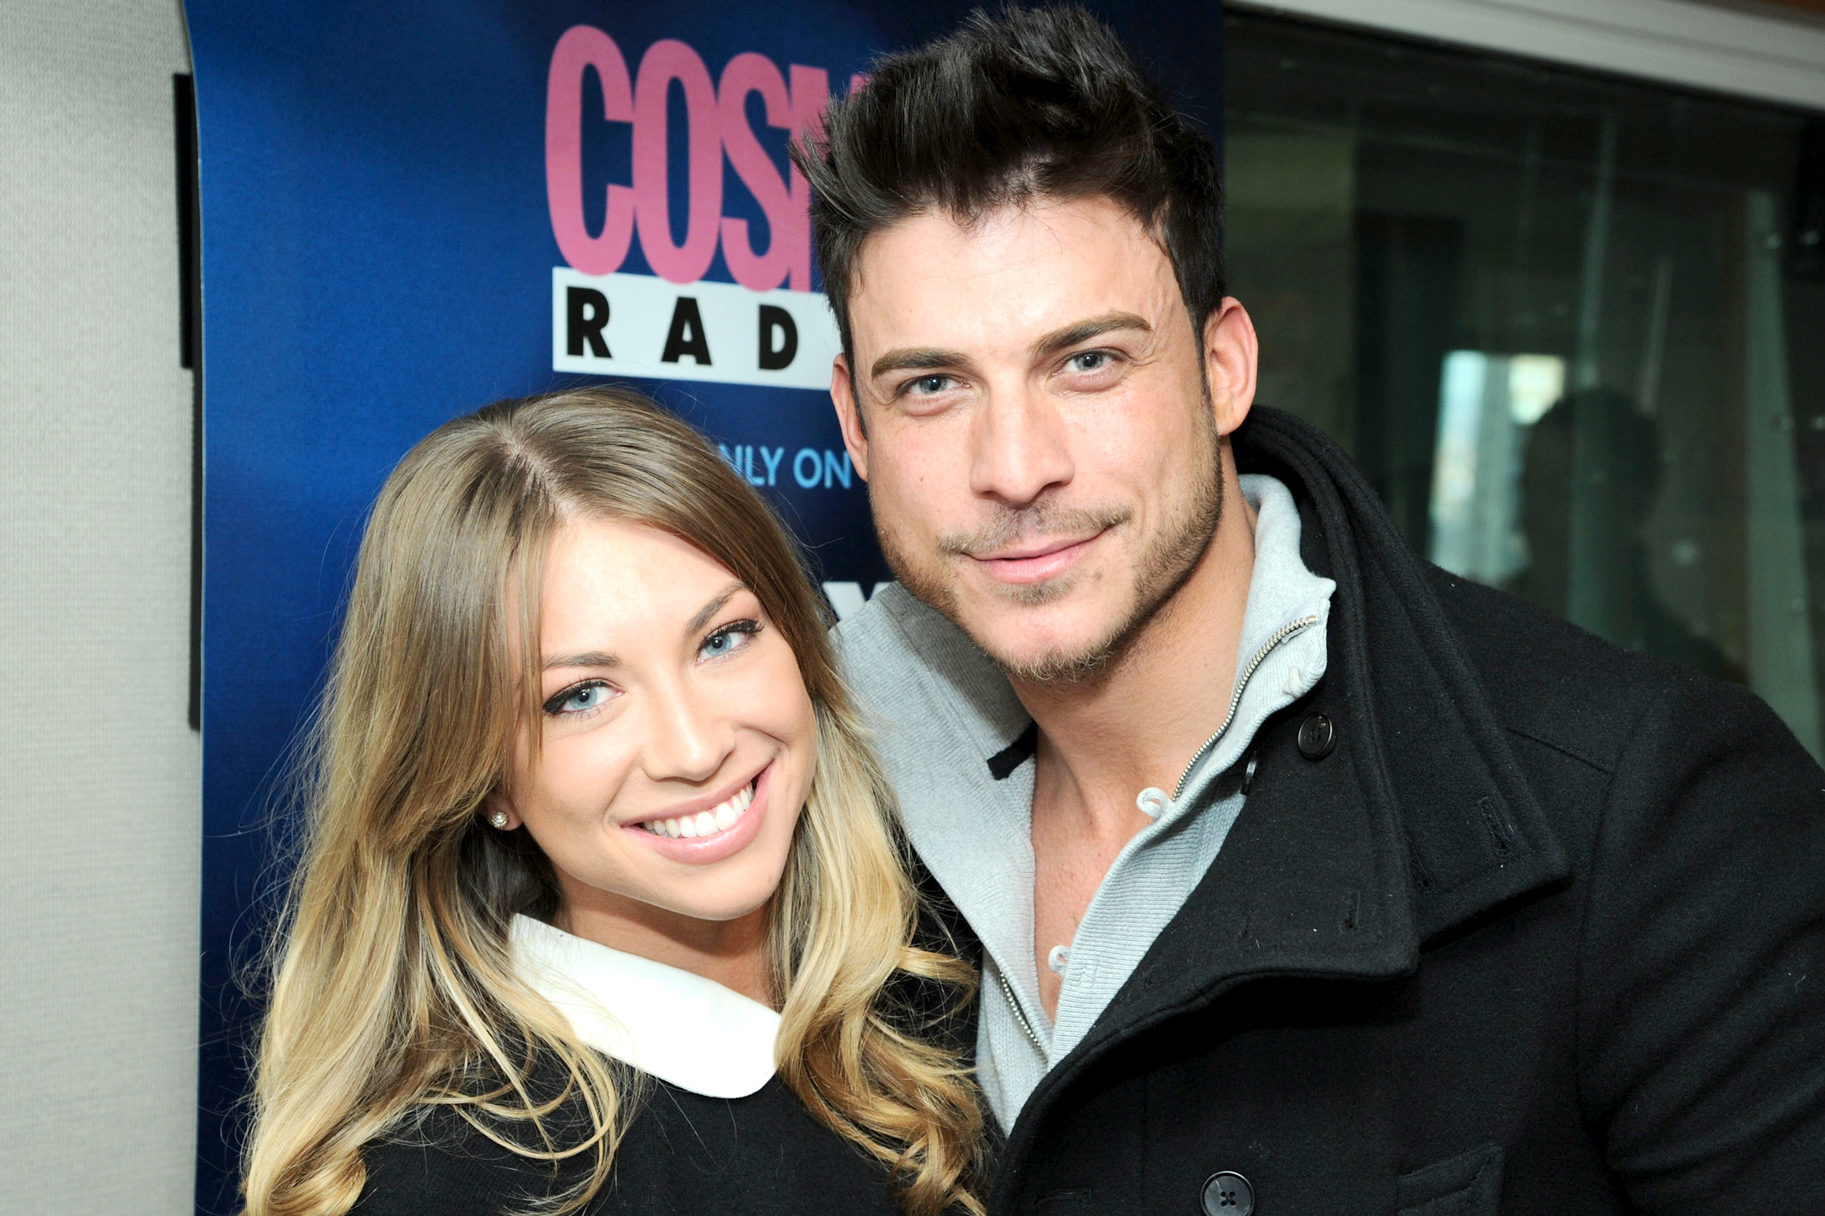 Jax Taylor and Stassi Schroeder are famous exes from Vanderpump Rules.